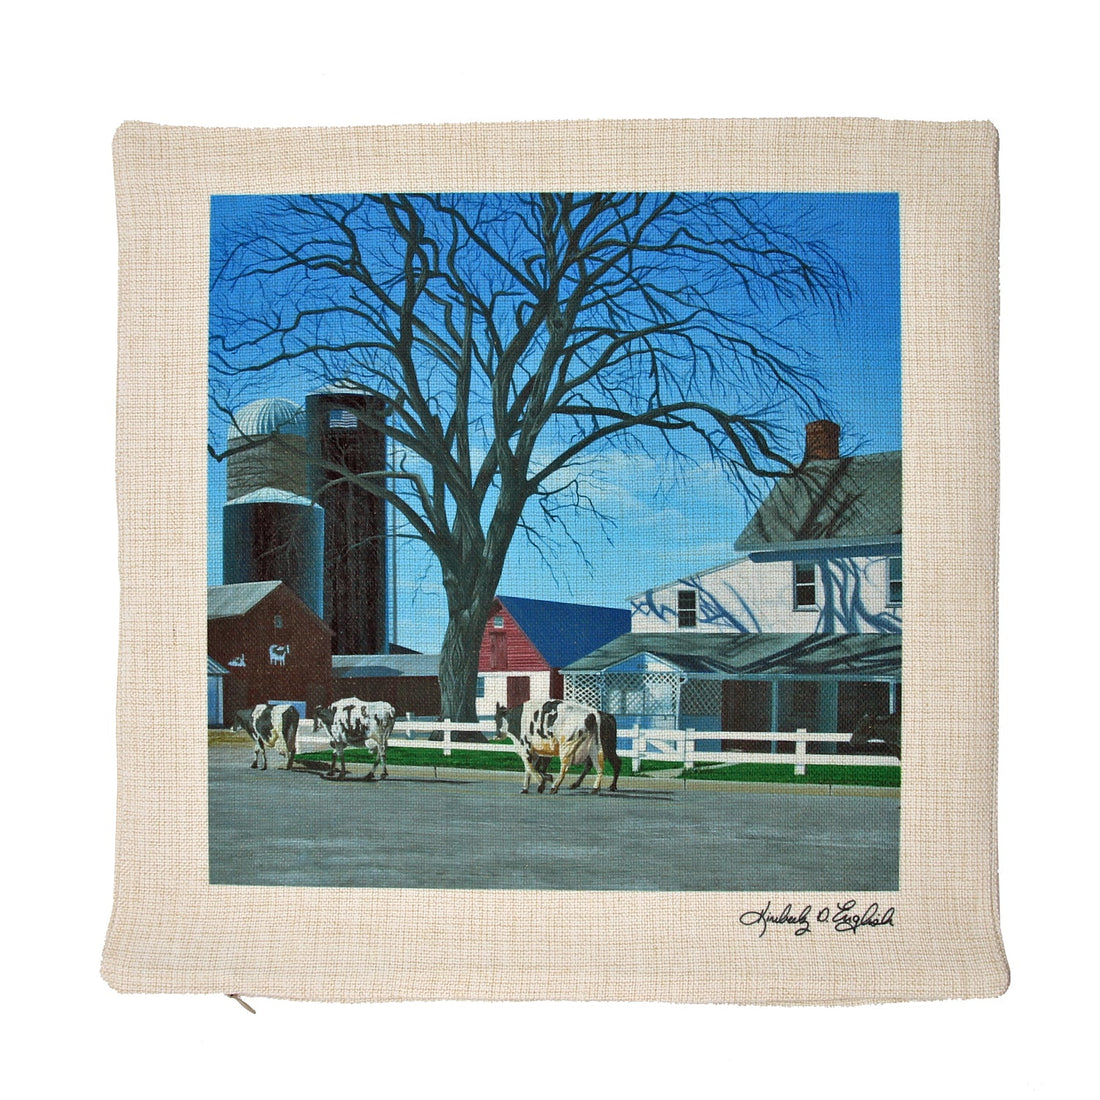 Caught in a Country Moment Pillow Sham